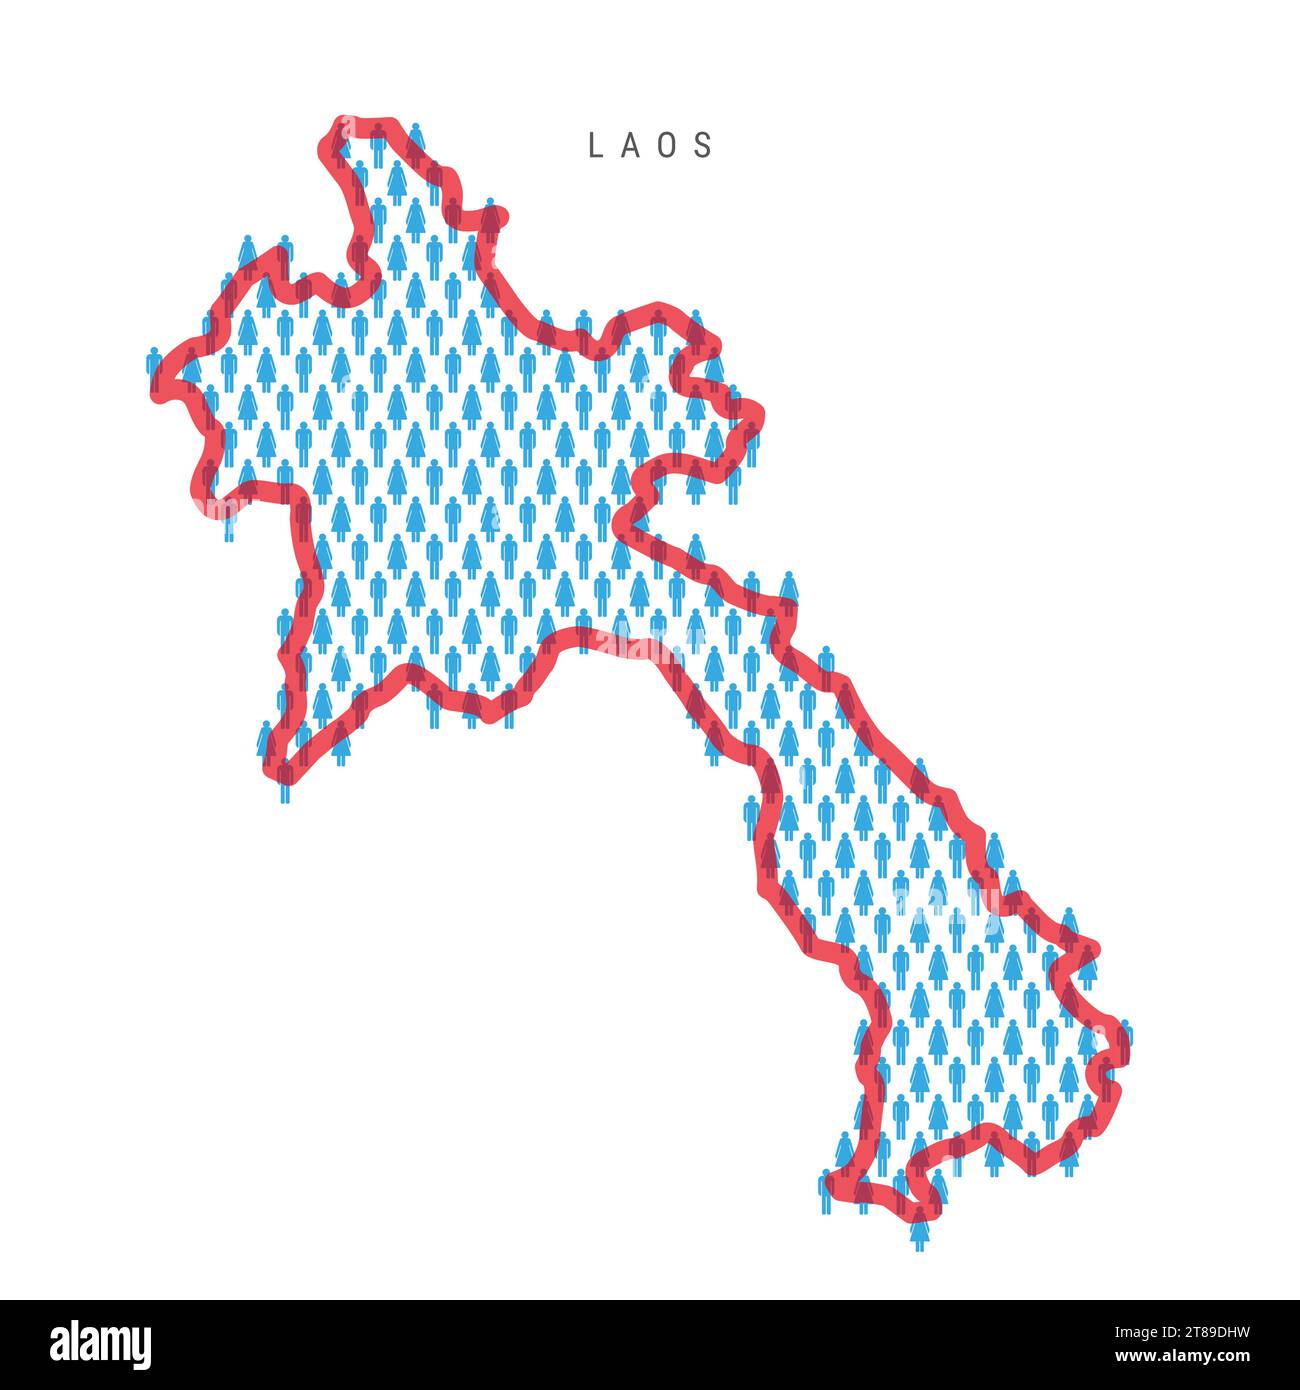 Laos population map. Stick figures Laotian people map with bold red translucent country border. Pattern of men and women icons. Isolated vector illust Stock Vector